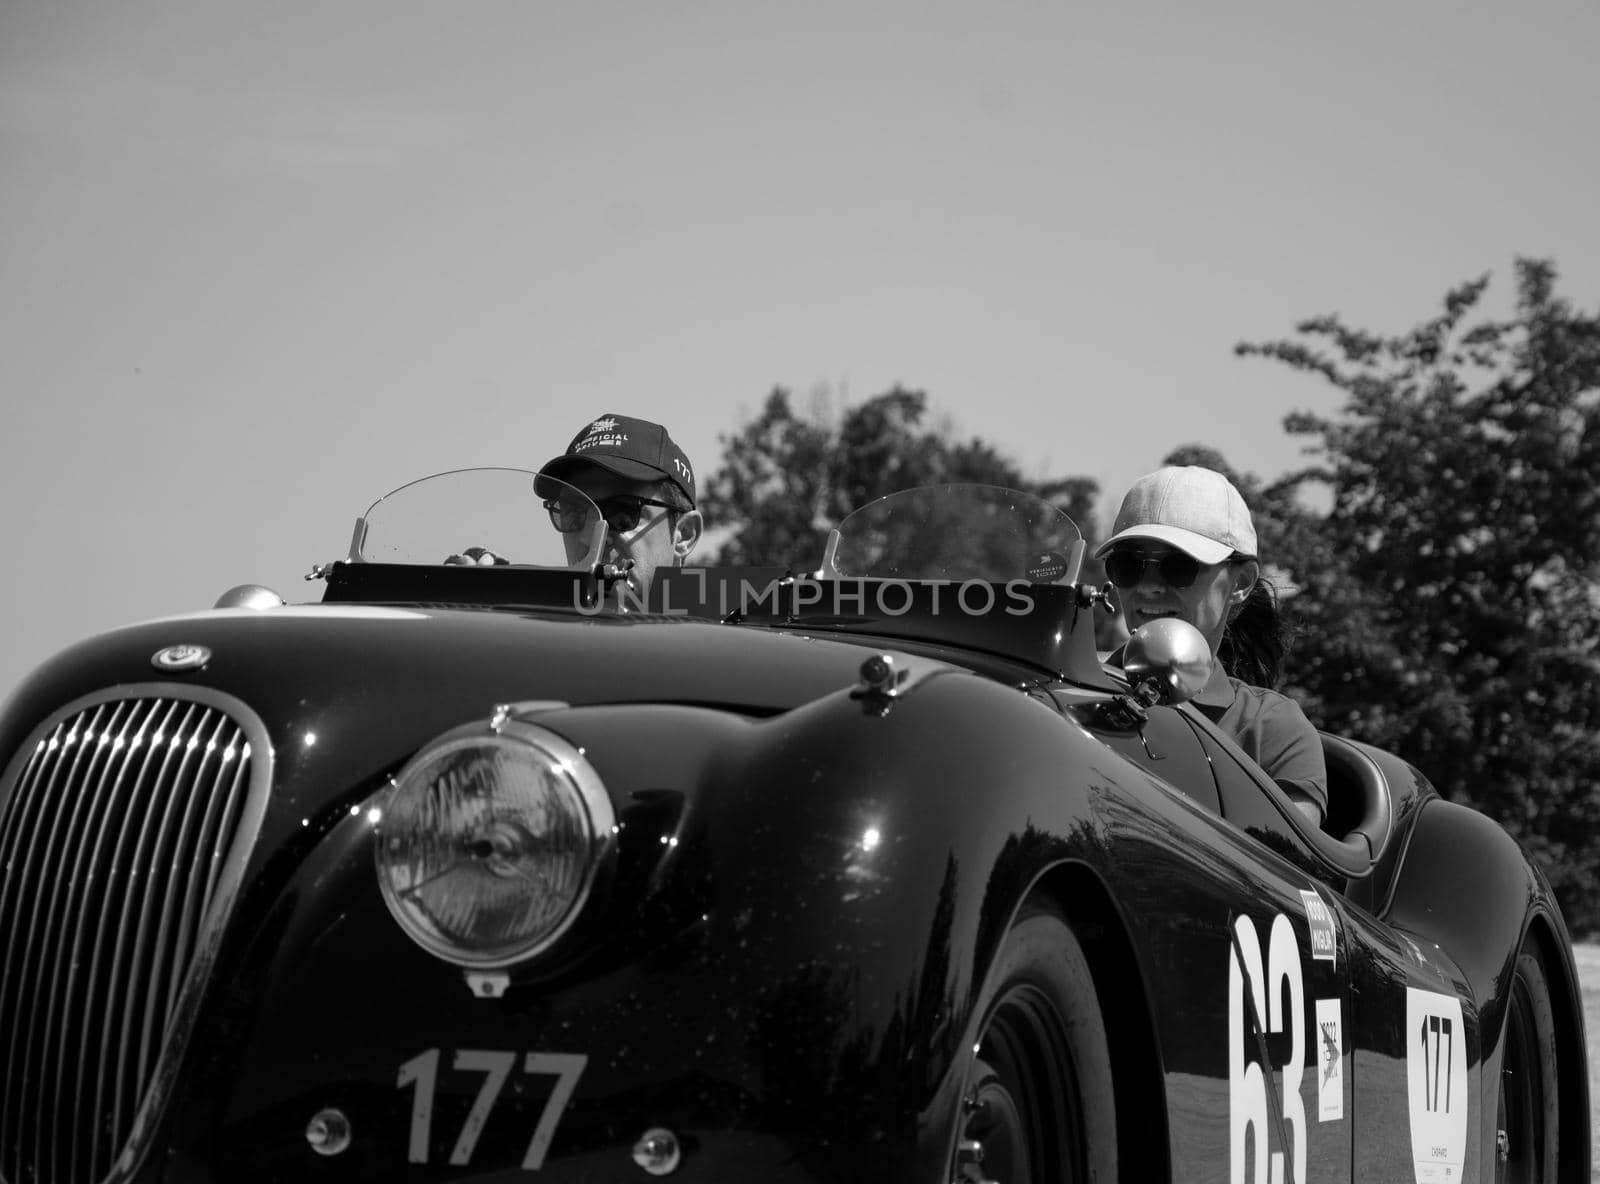 JAGUAR XK120 OTS ROADSTER 1950 on an old racing car in rally Mille Miglia 2022 the famous italian historical race (1927-1957 by massimocampanari